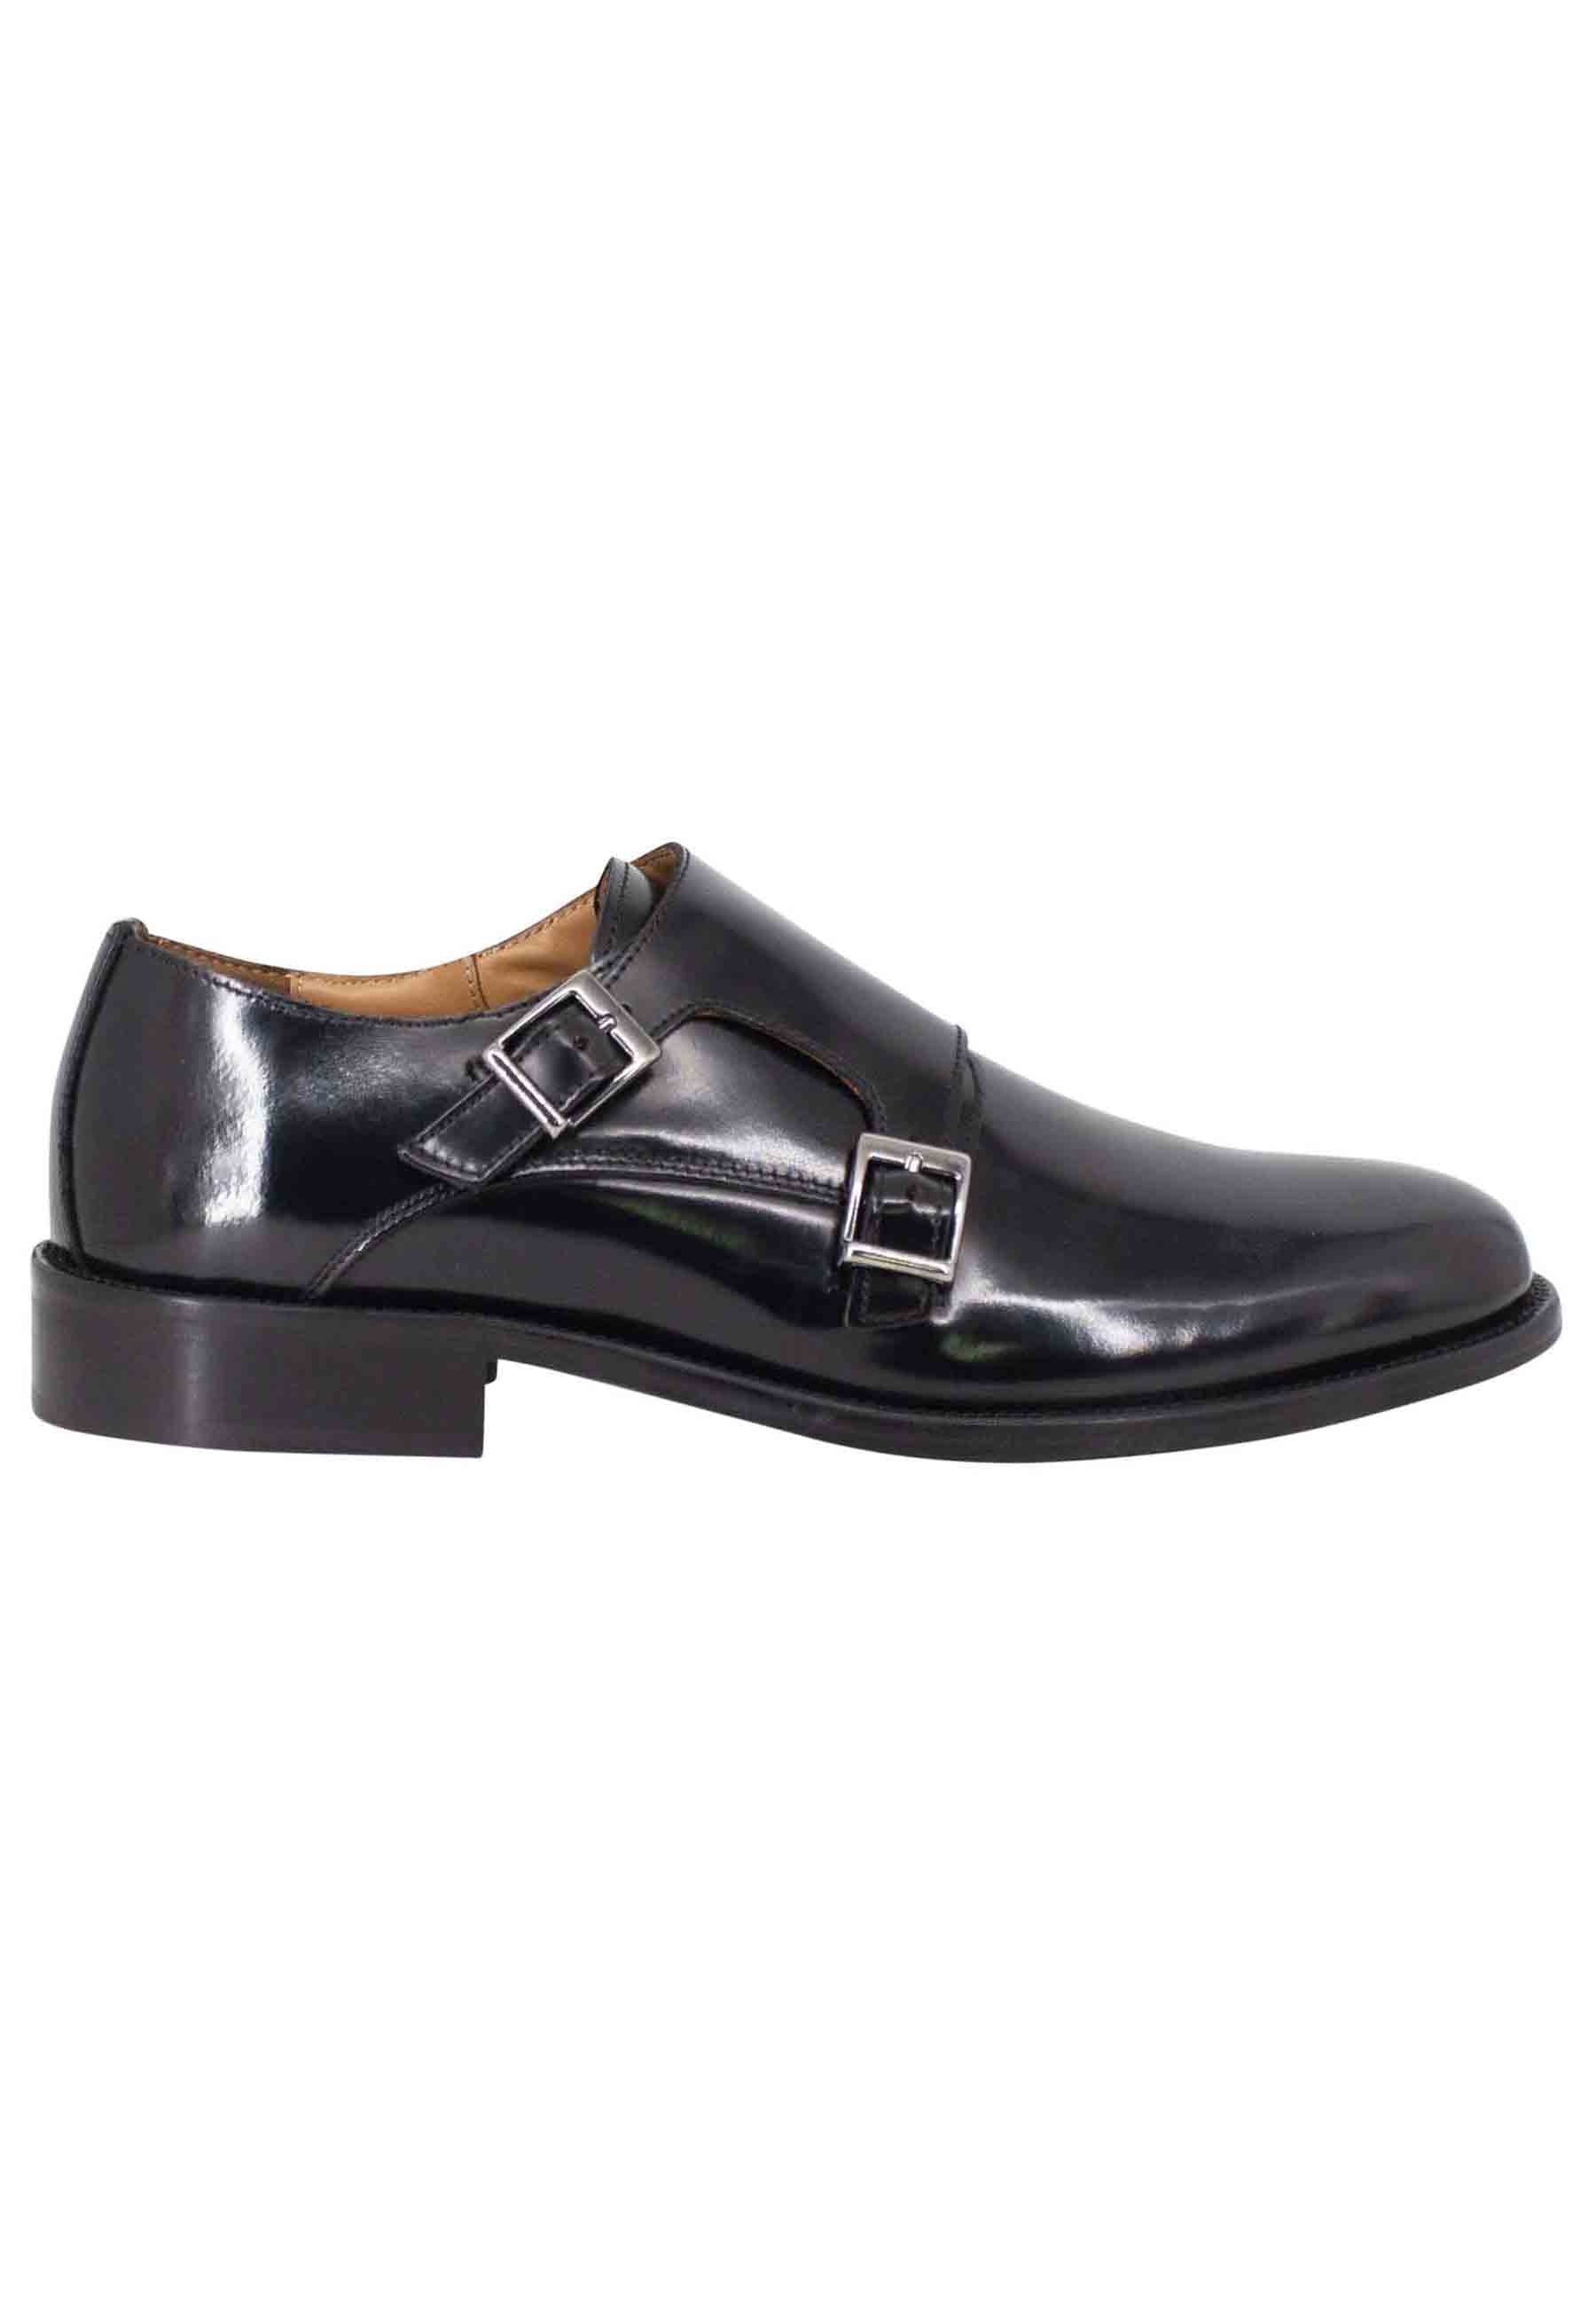 Men's diplomatic loafers in black shiny leather and stitched leather sole